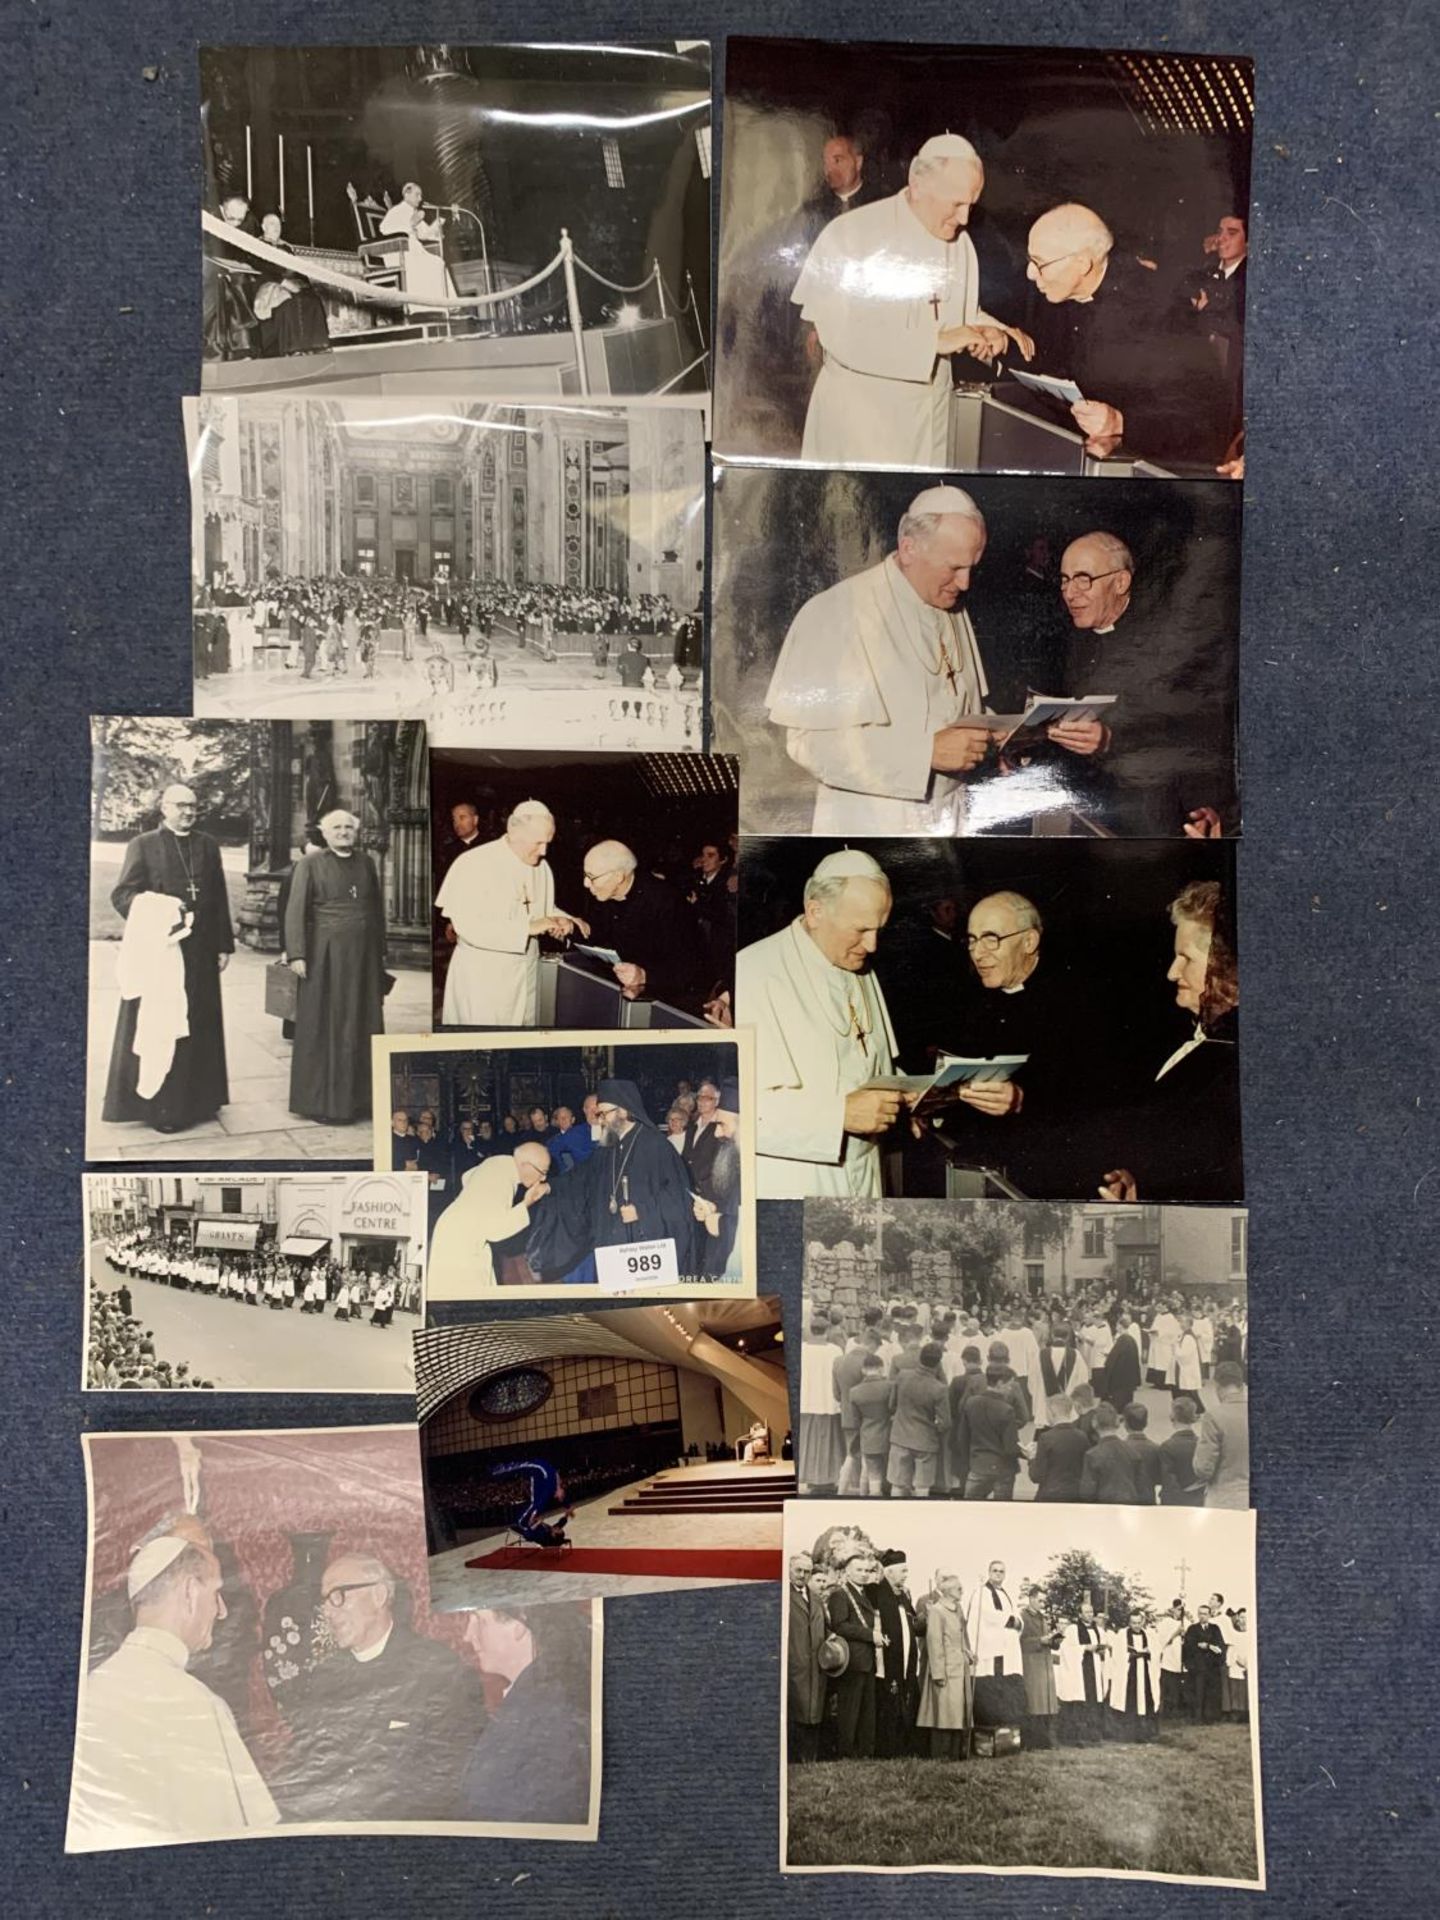 A COLLECTION OF PREVIOUSLY UNSEEN PHOTOS OF POPES, ARCHBISHOP OF CANTERBURY, ETC.,